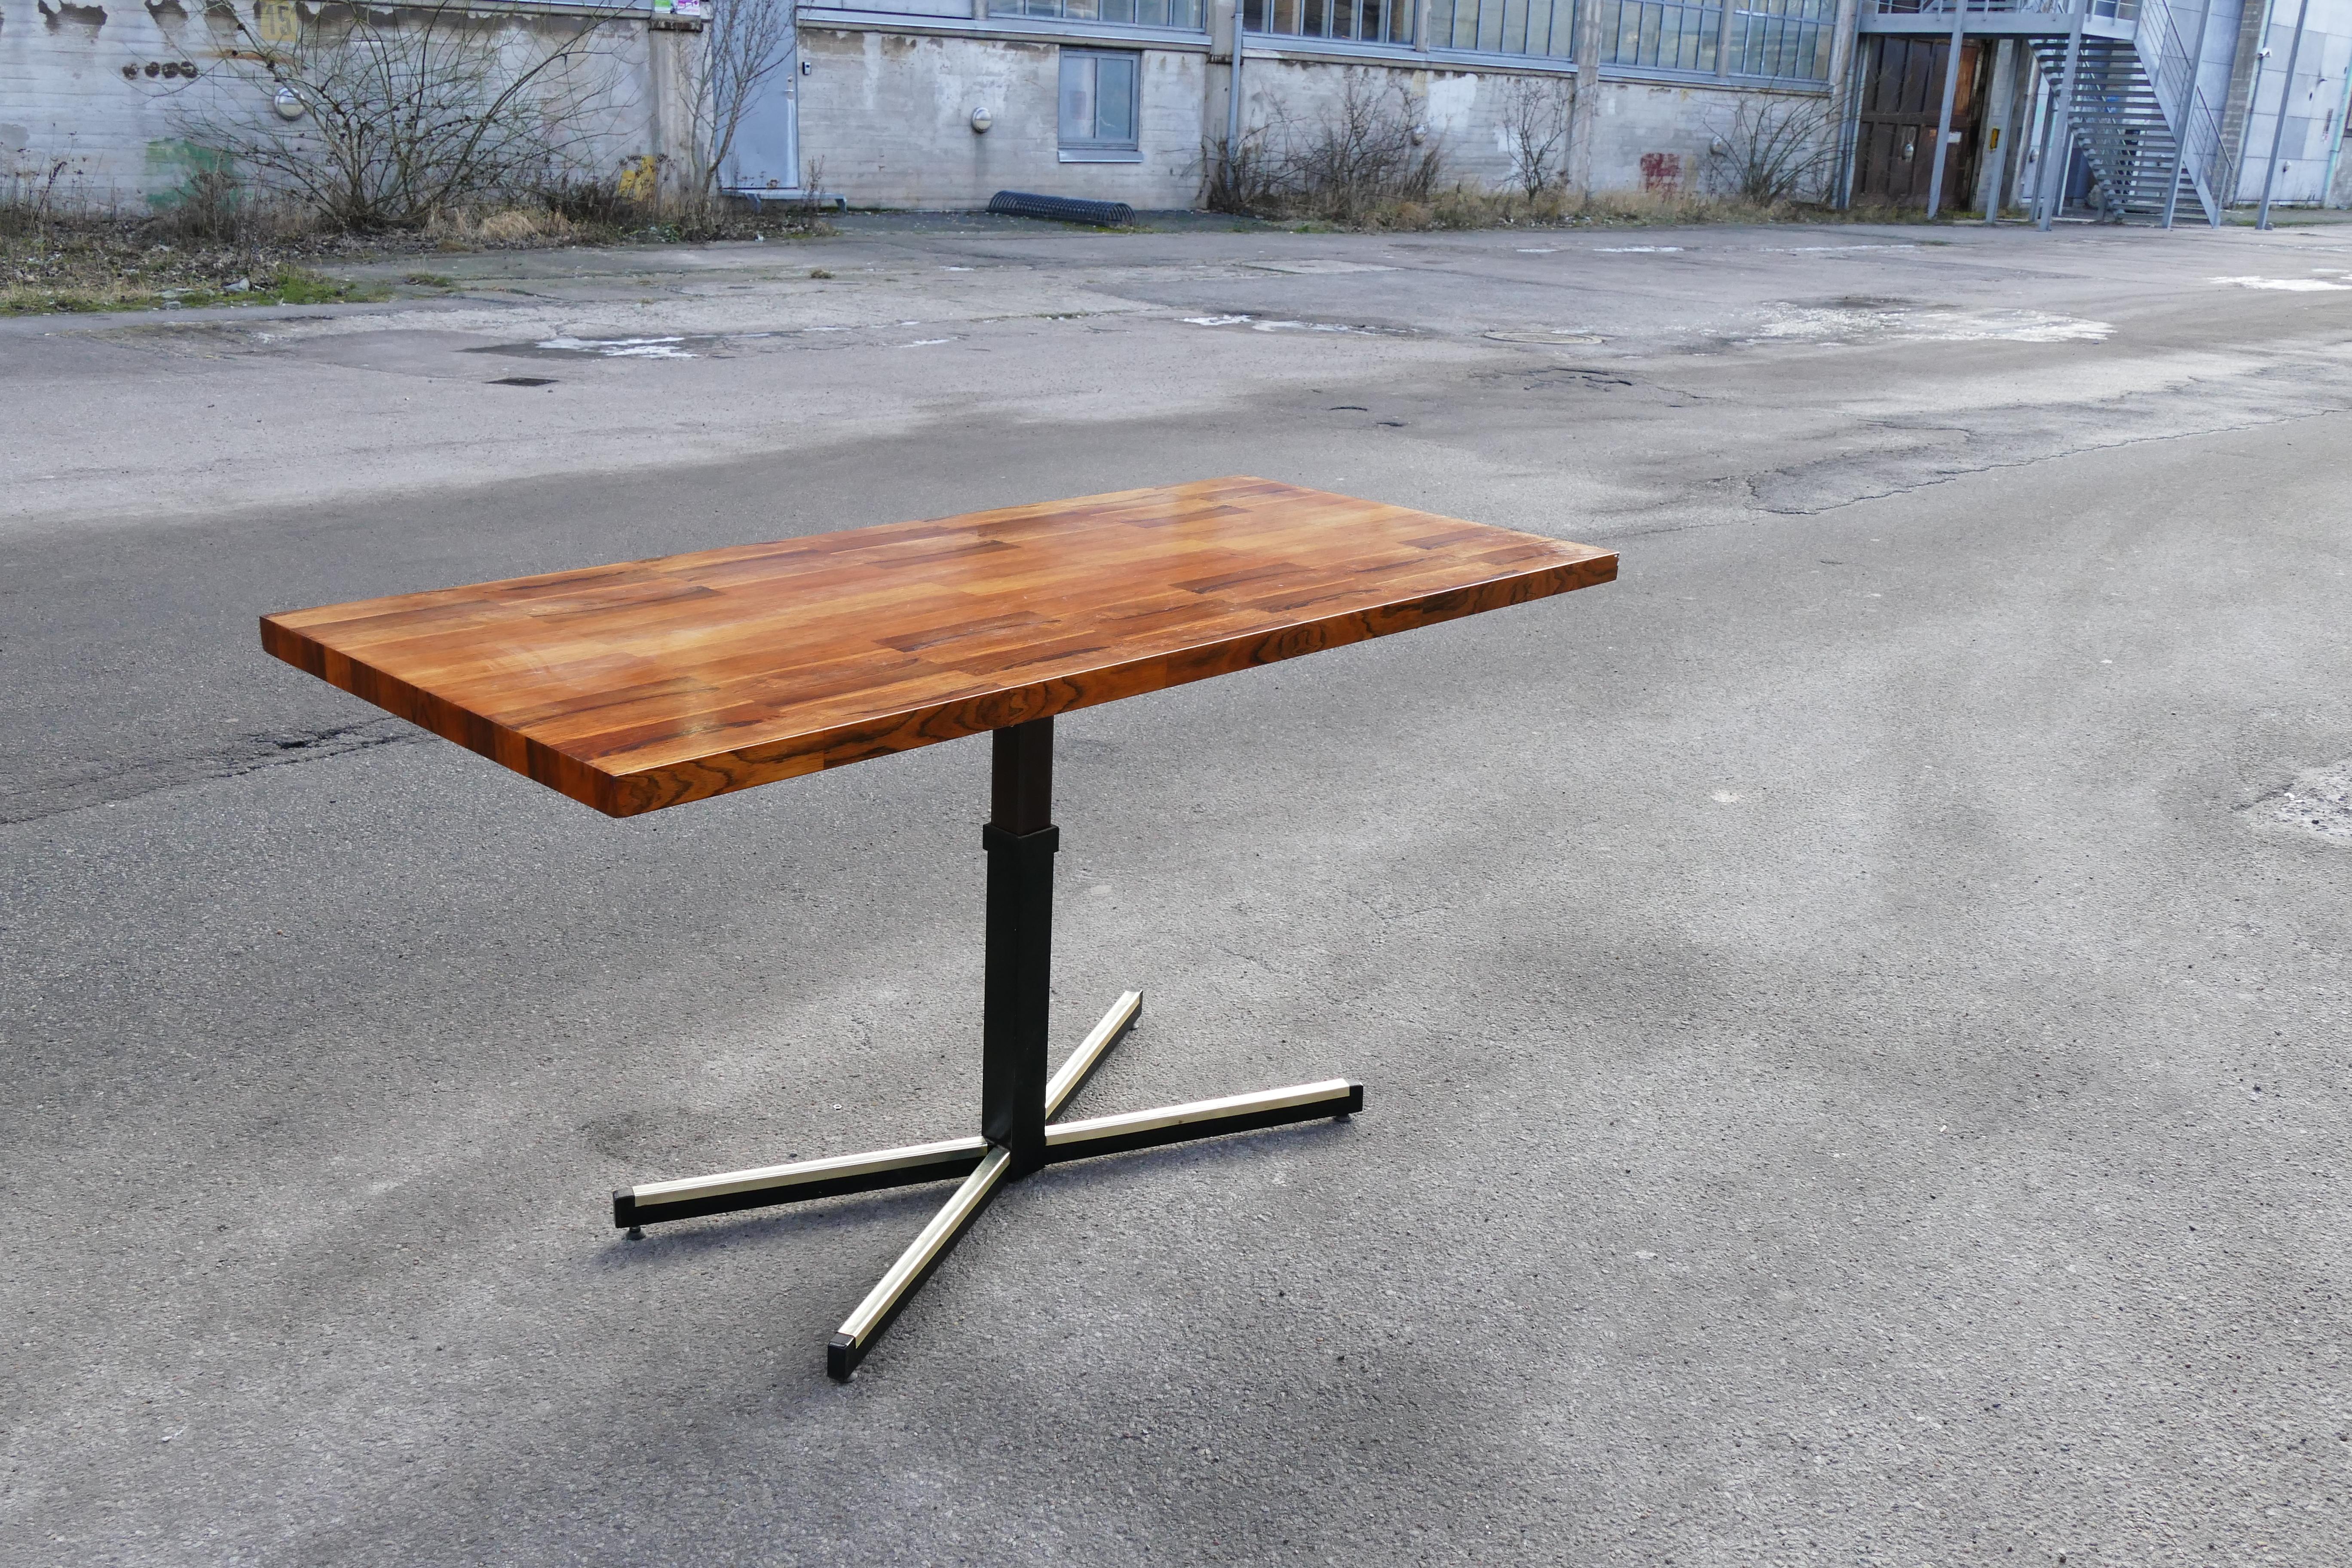 A unique coffee table that can be raised to a dinning or desk like height. Rosewood and beautiful details in this piece of modern history.